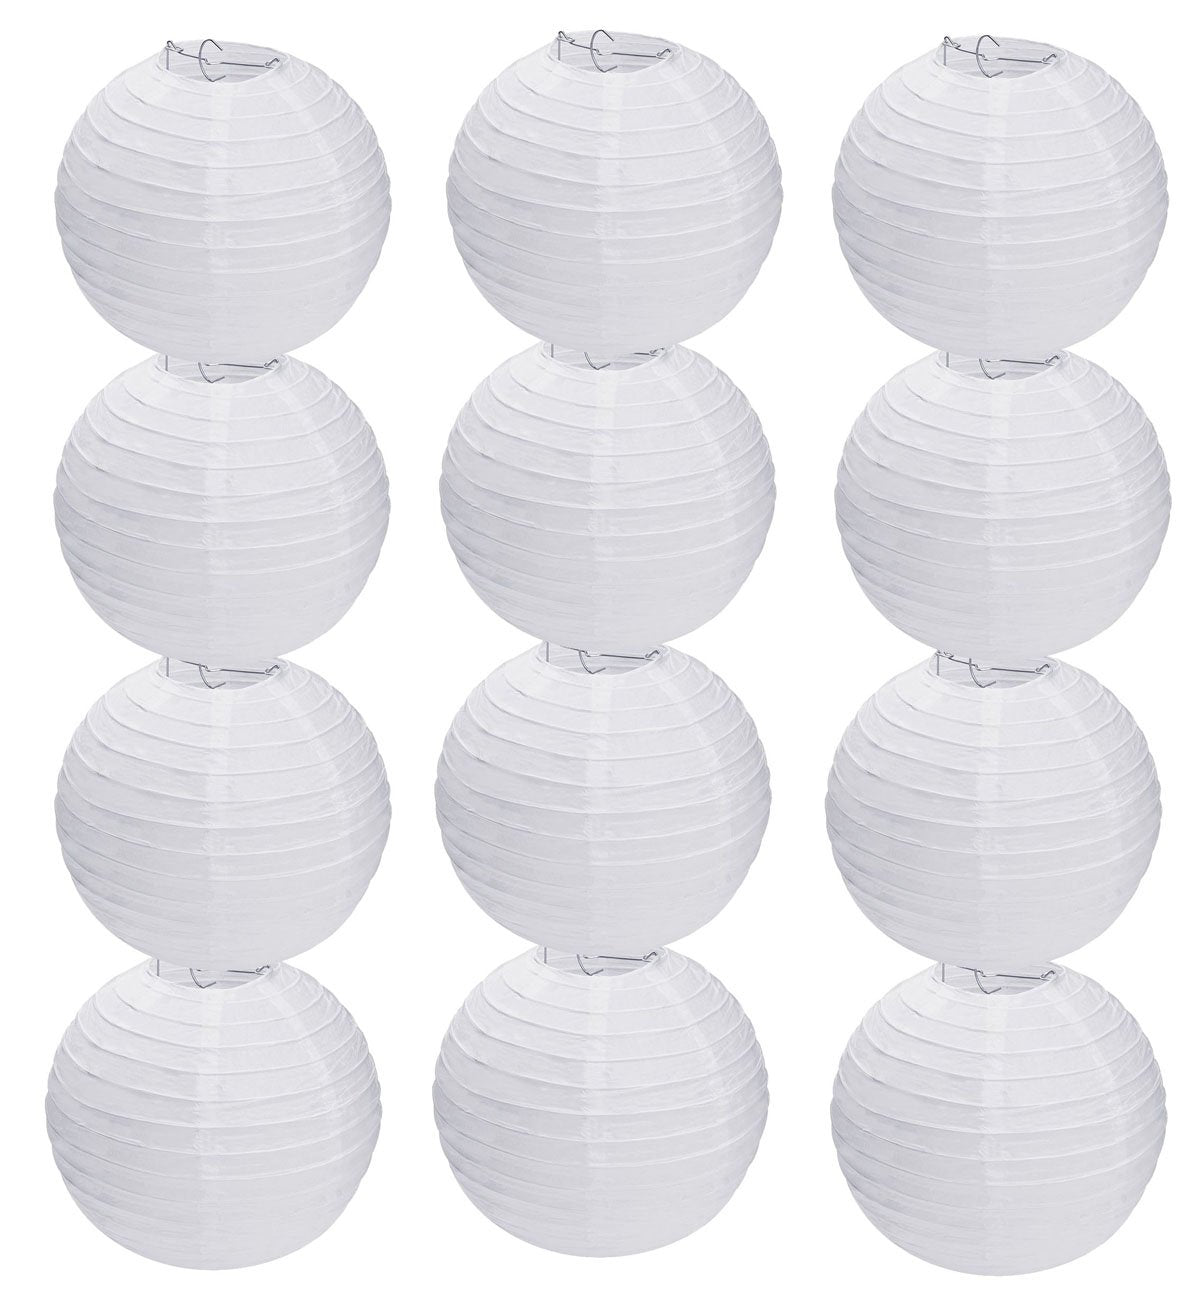 Tmade 12 Pack 12" White Paper Lanterns for Birthday Baby Shower Wedding Party Garden Home Decoration